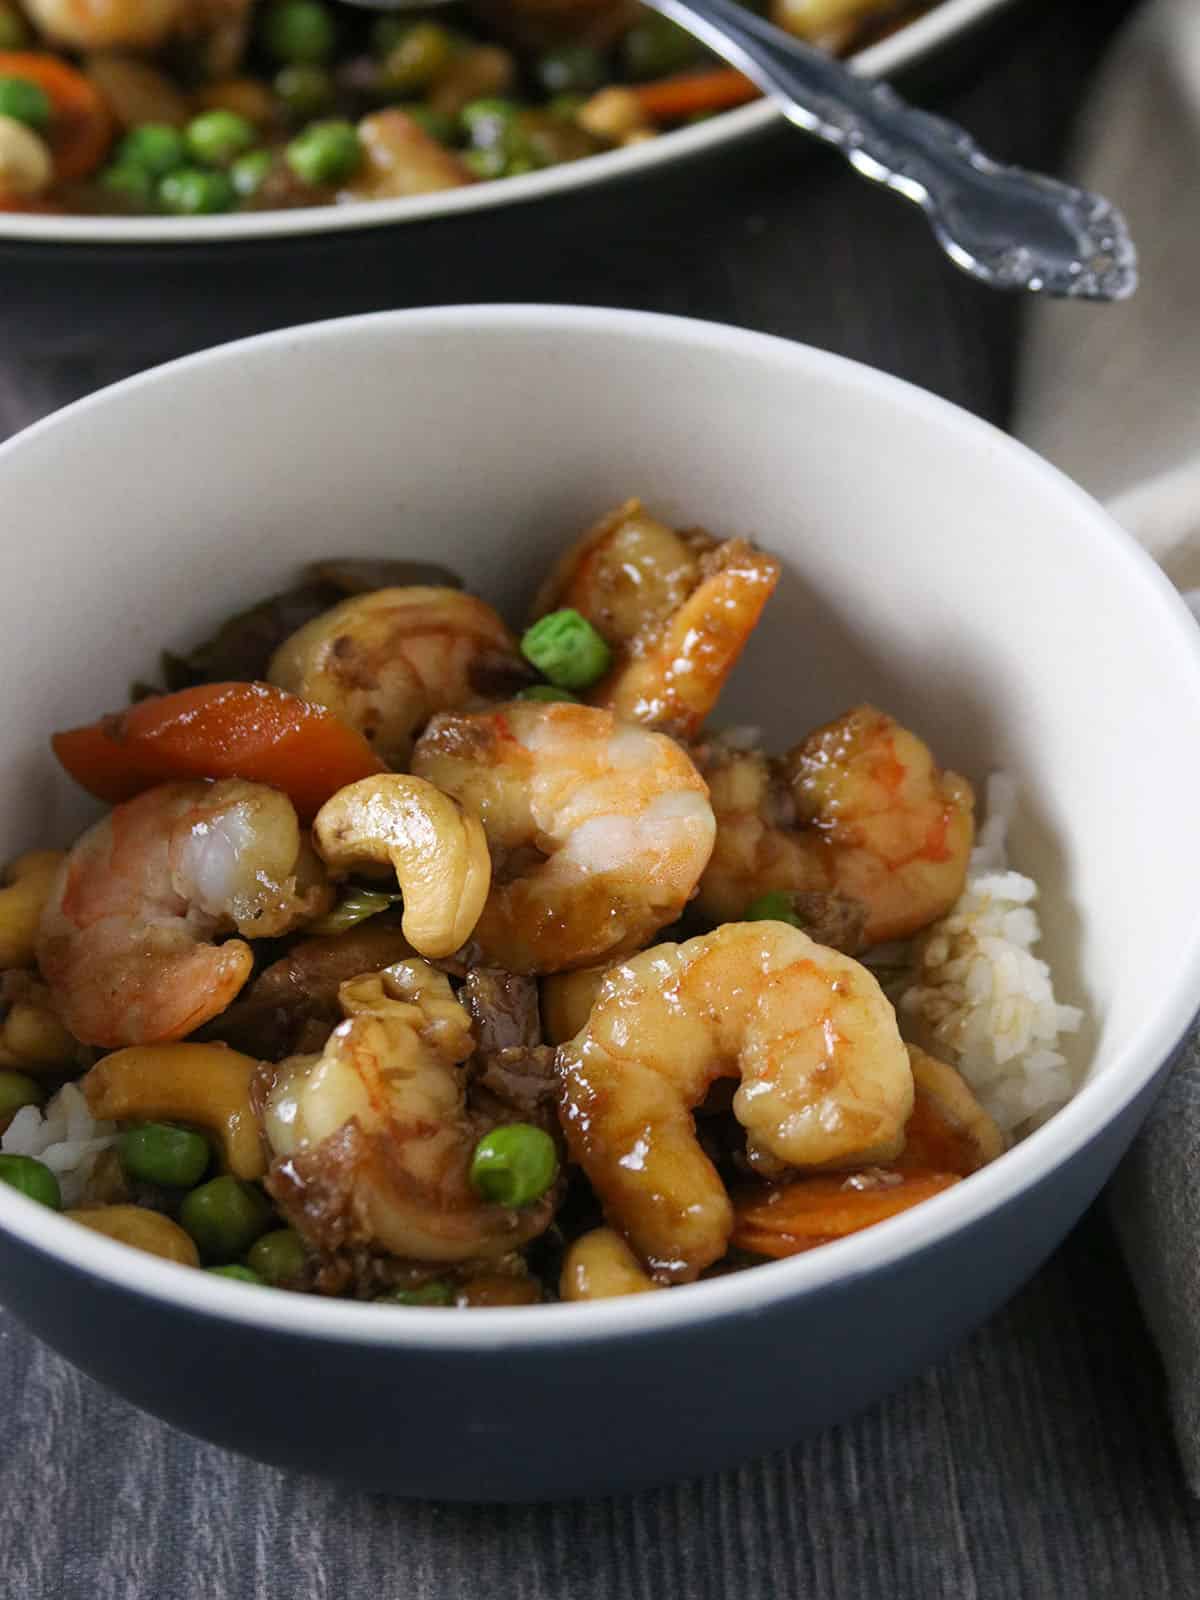 shrimp green peas and cashew stir-fry in a bowl over steamed rice